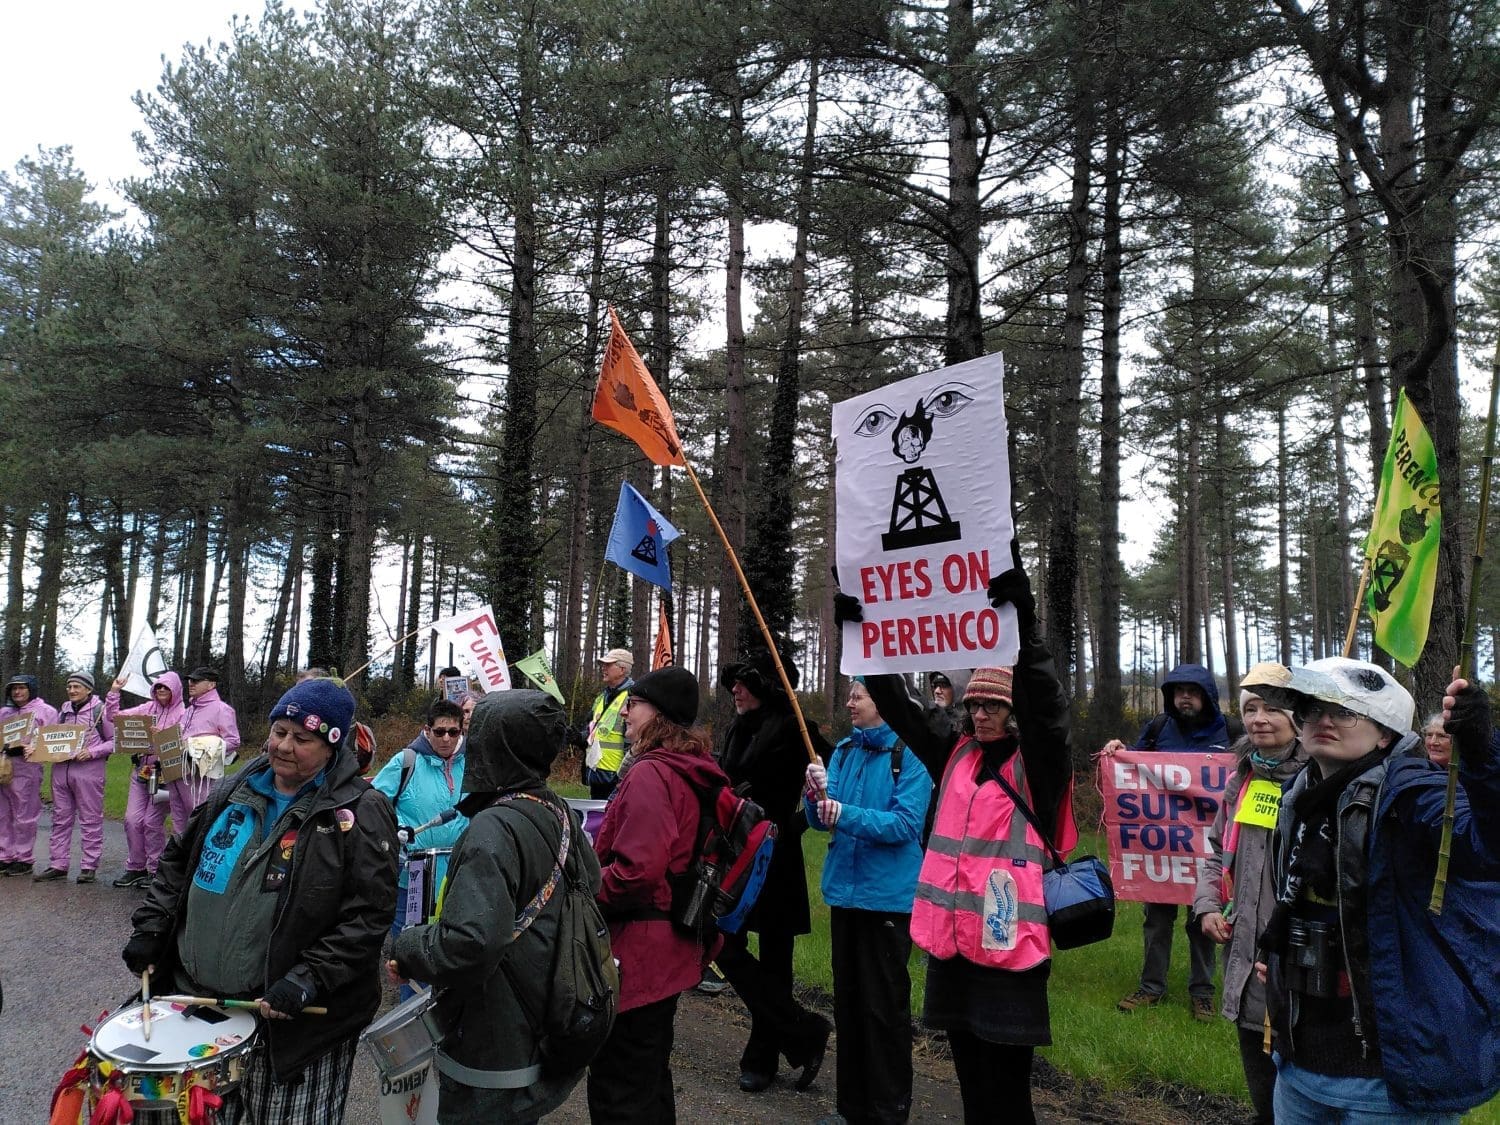 Protesters gather with placards and drums at Wytch Farm.